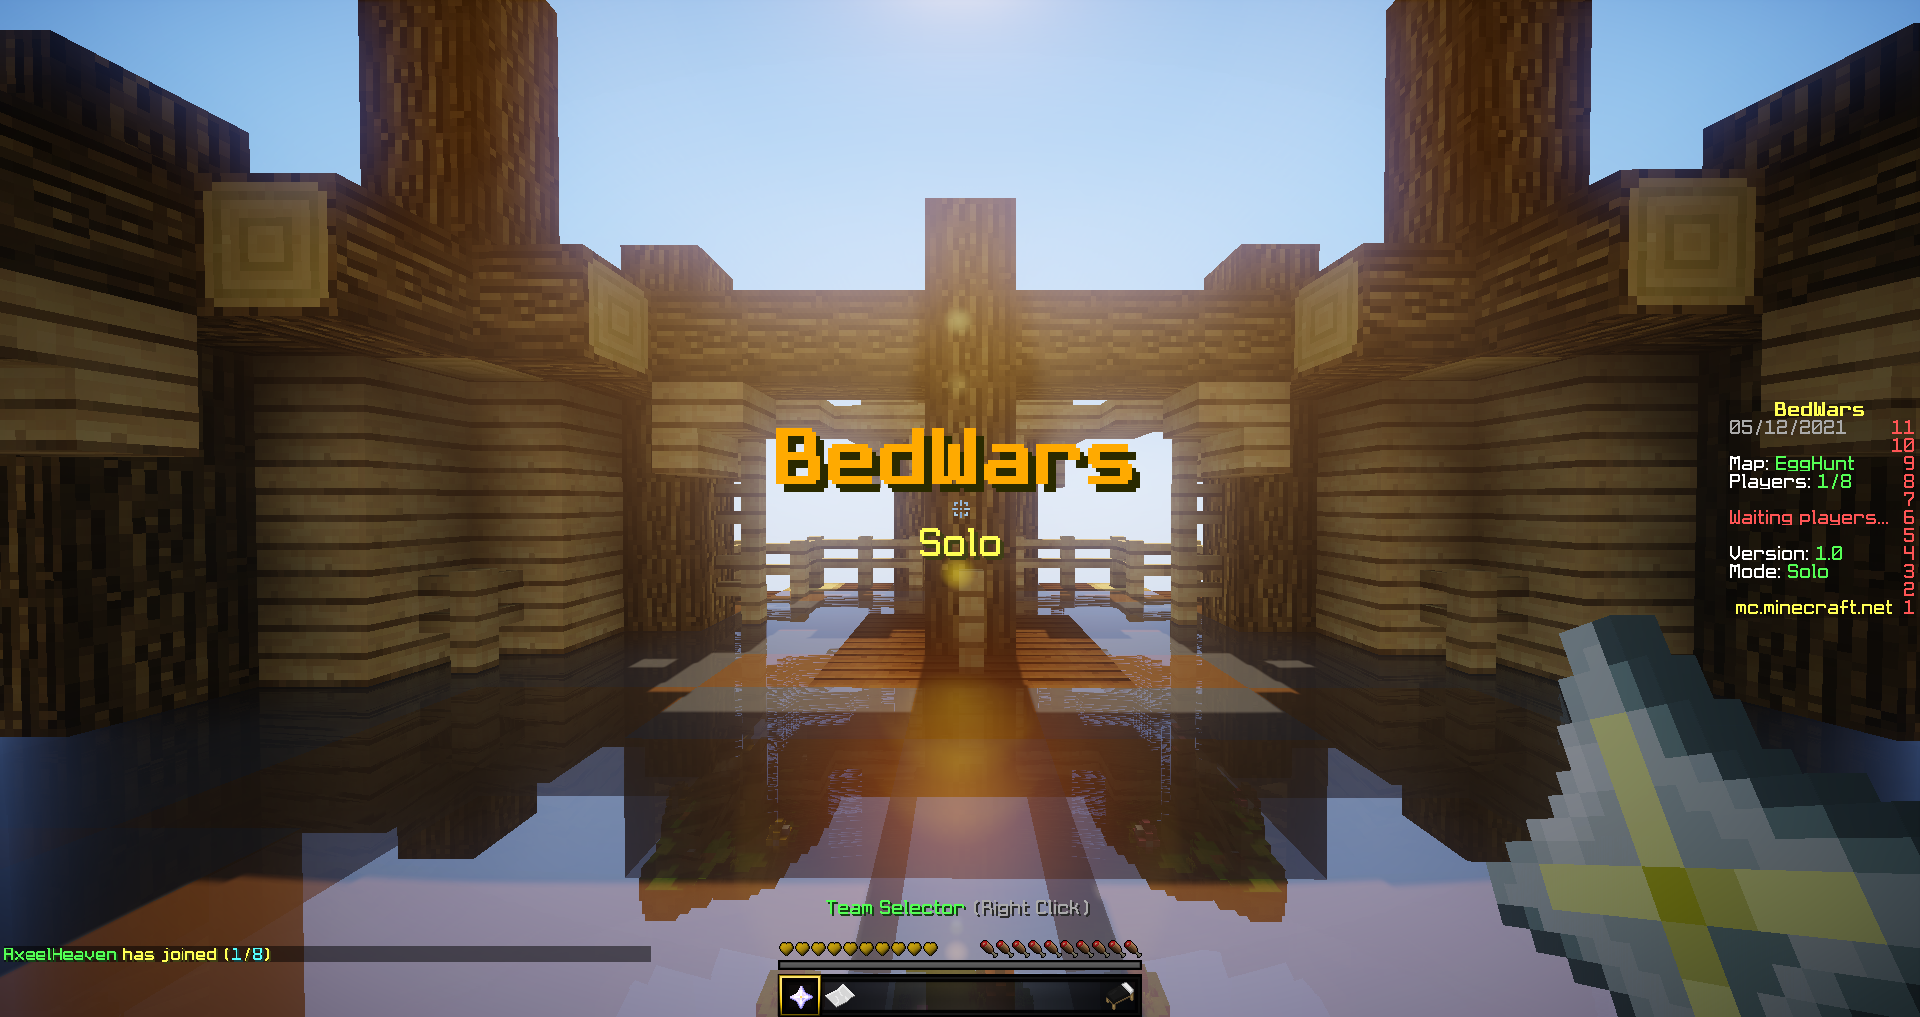 Daily solo bedwars leaderboards!